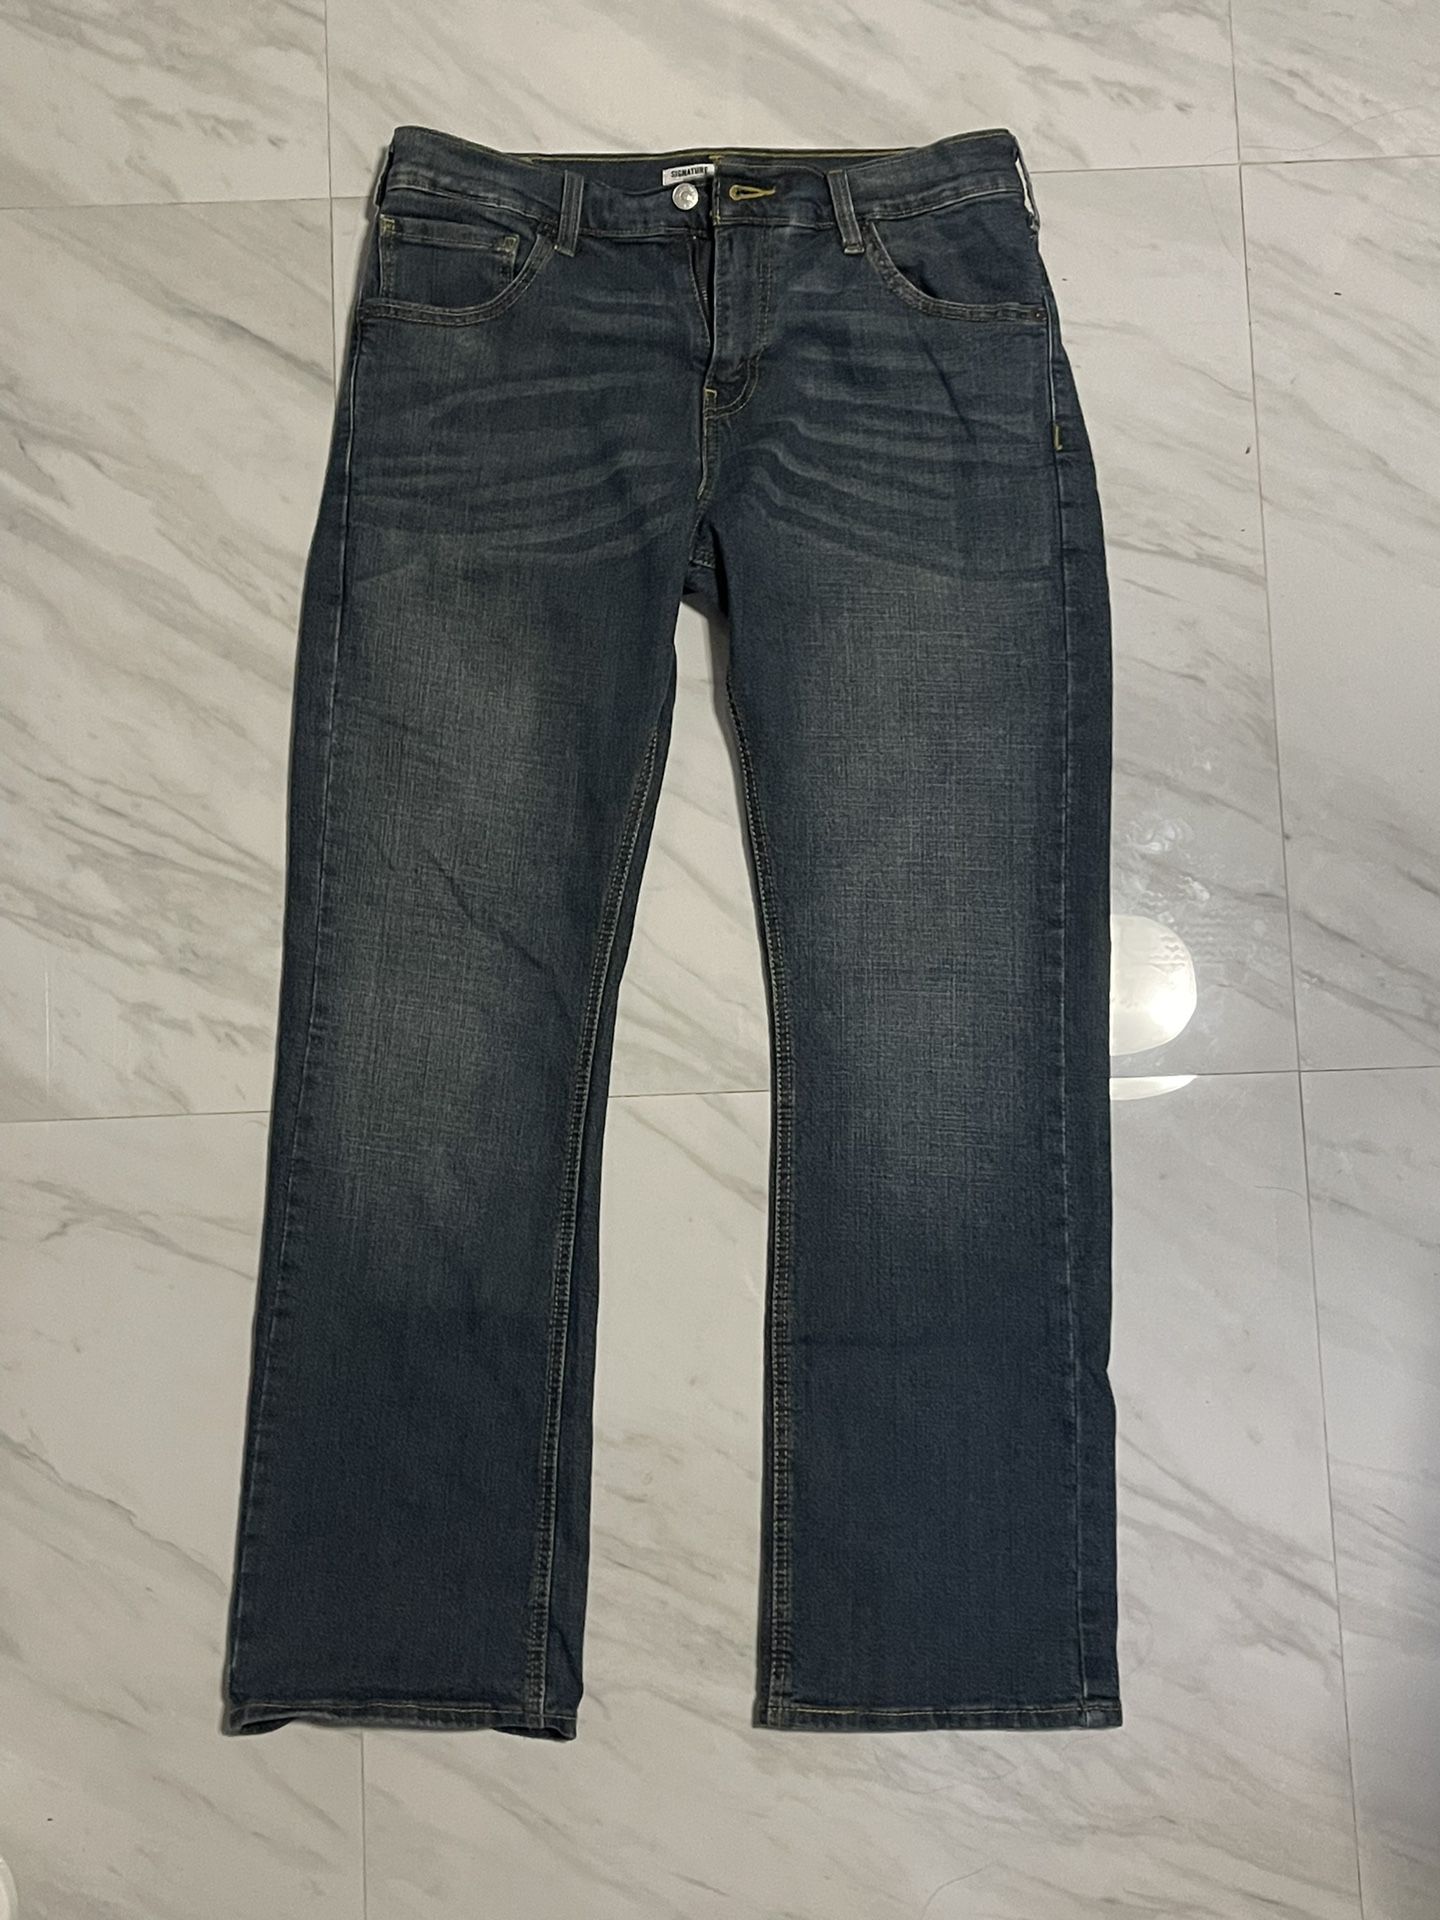 Signature by Levi Strauss and Co. Gold label Bootcut Jeans 30x30